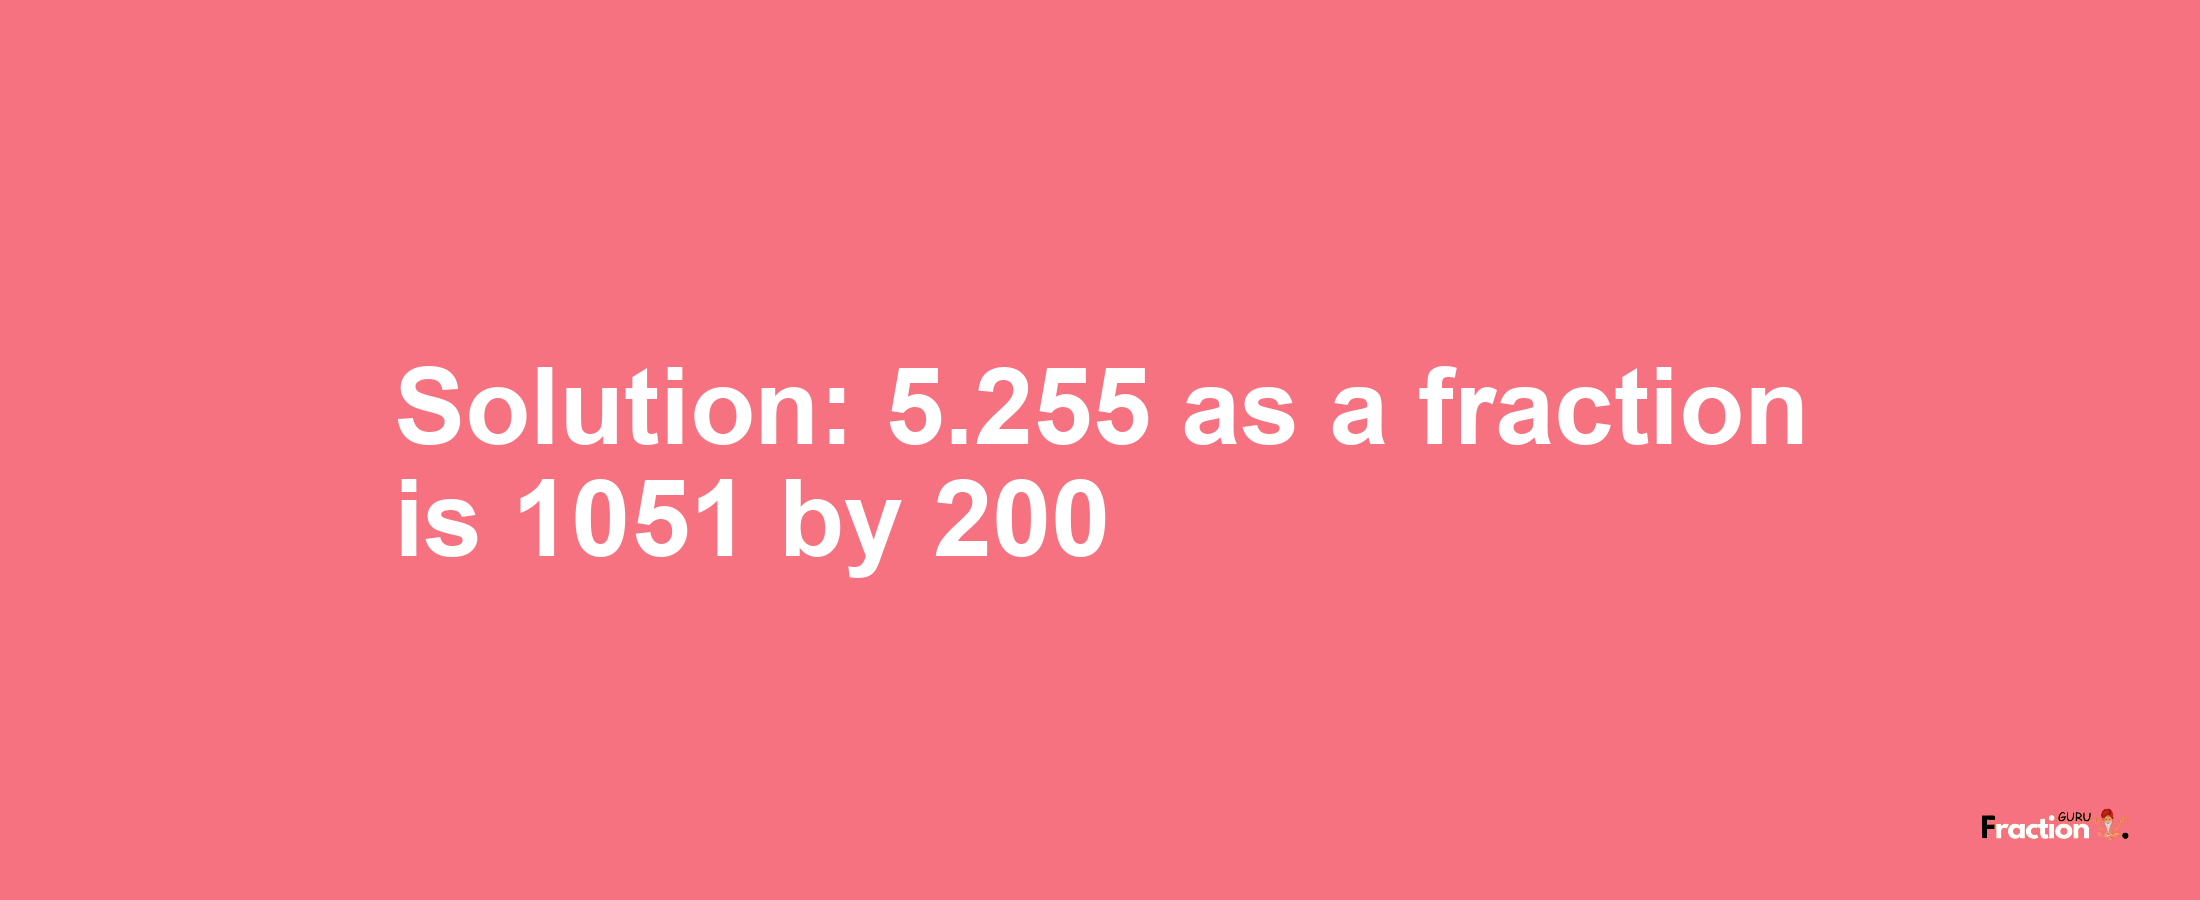 Solution:5.255 as a fraction is 1051/200